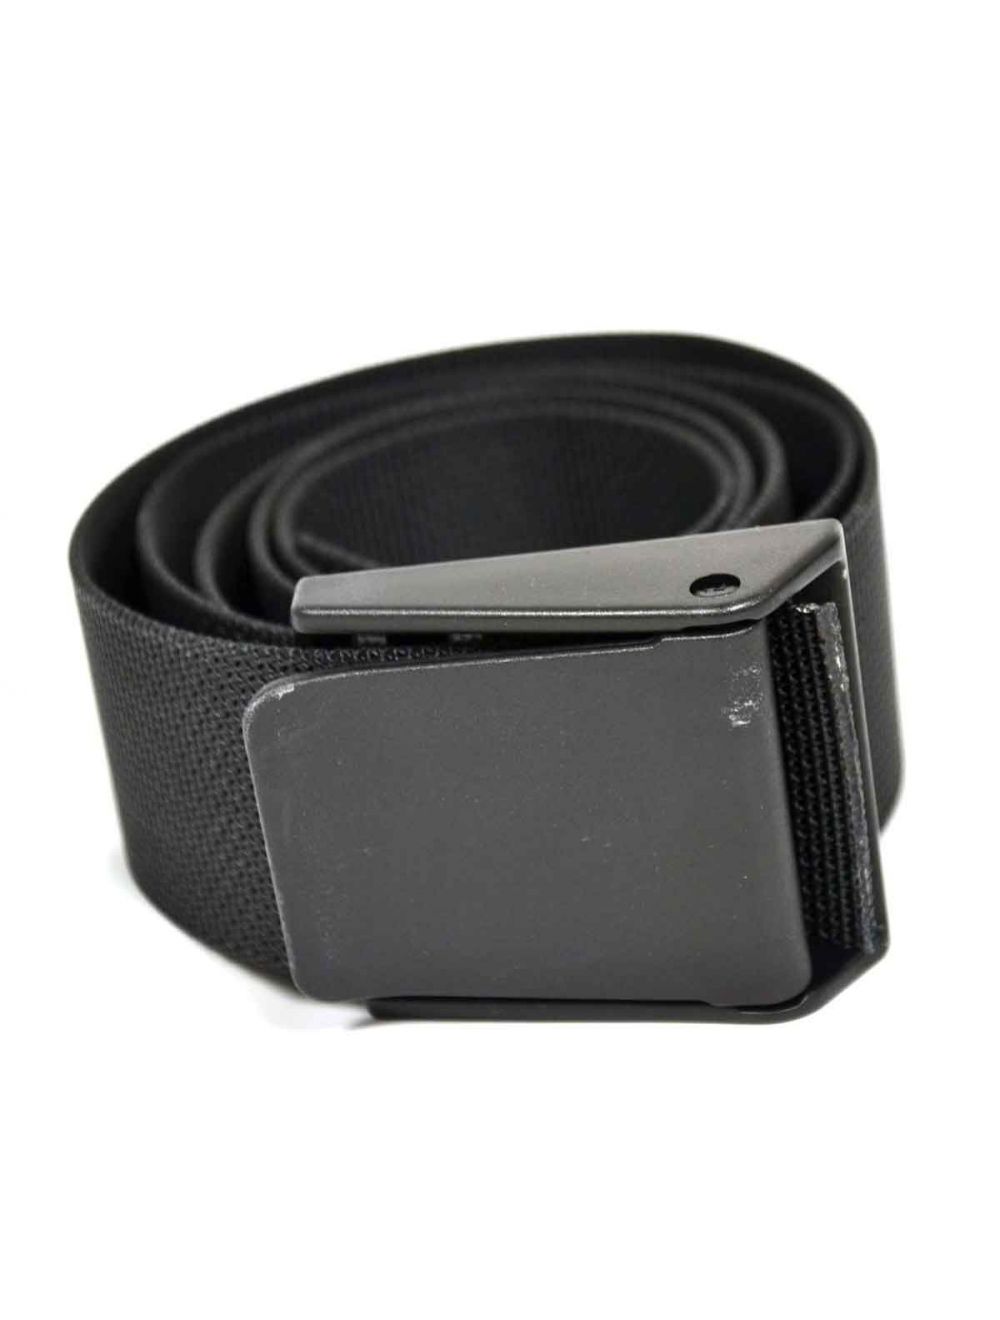 Edge Weight Belt 2in with Plastic Buckle